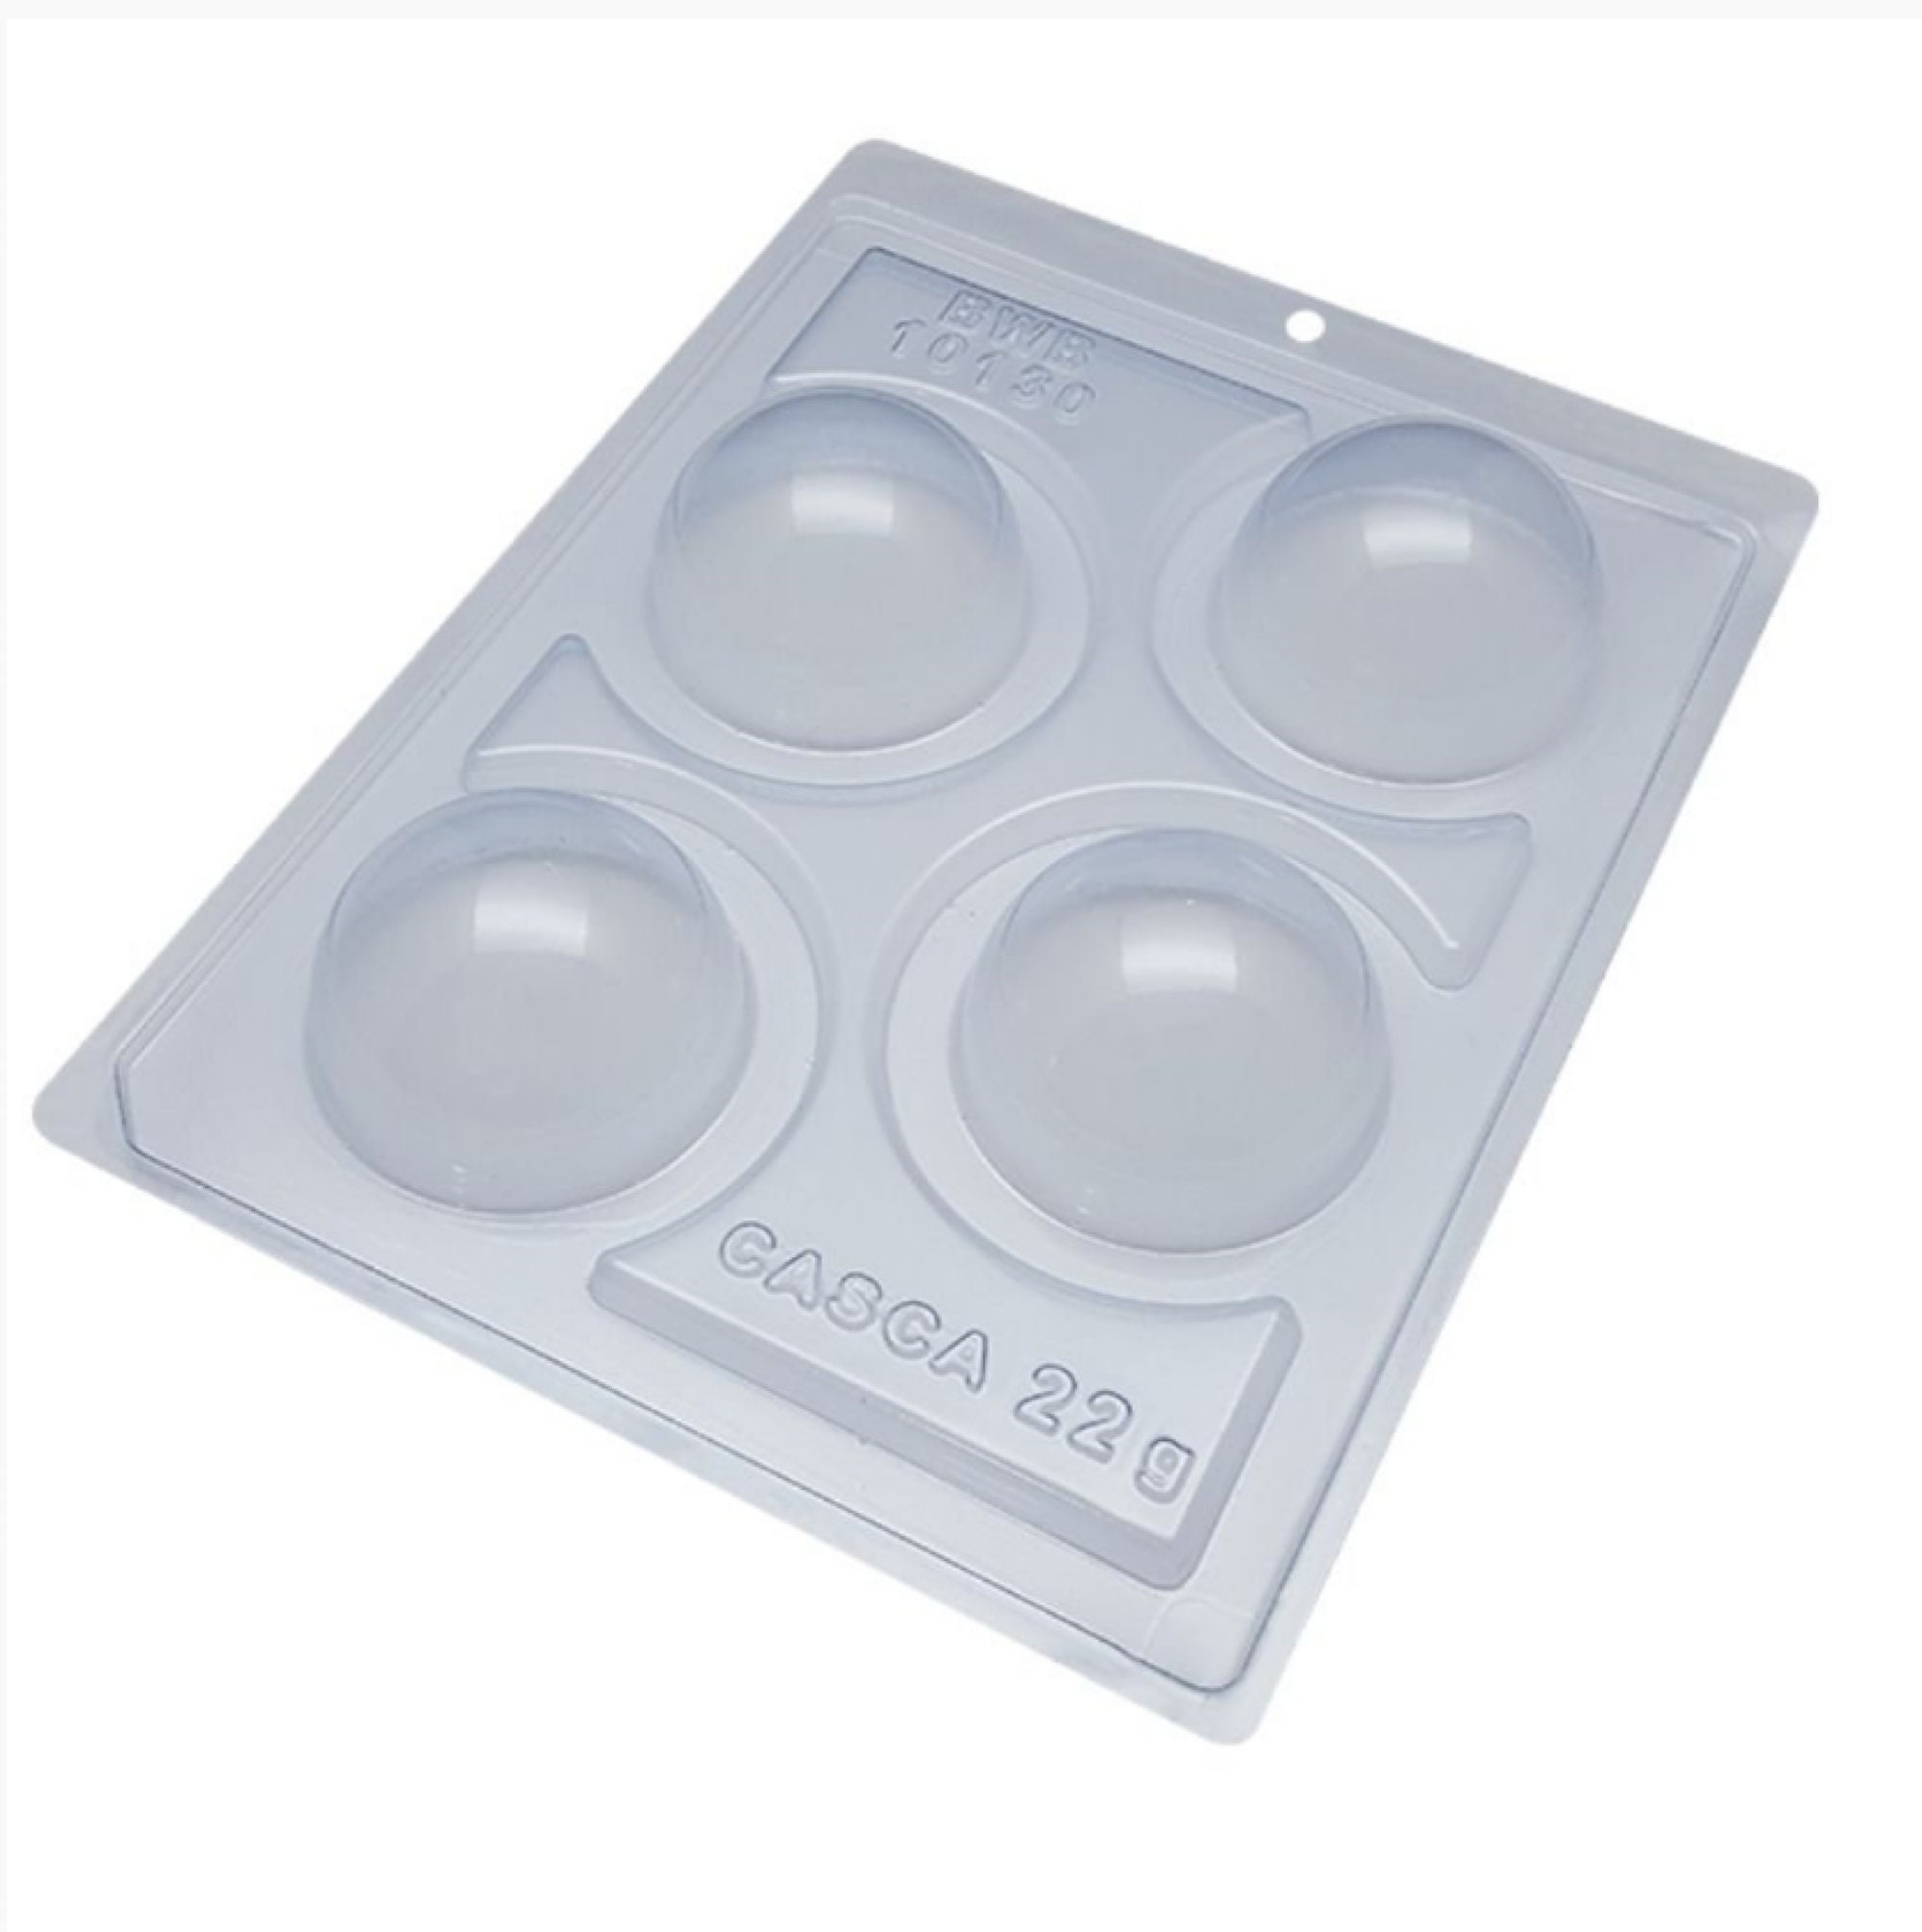 Webake silicone shere chocolate bomb molds for cordial truffle pudding